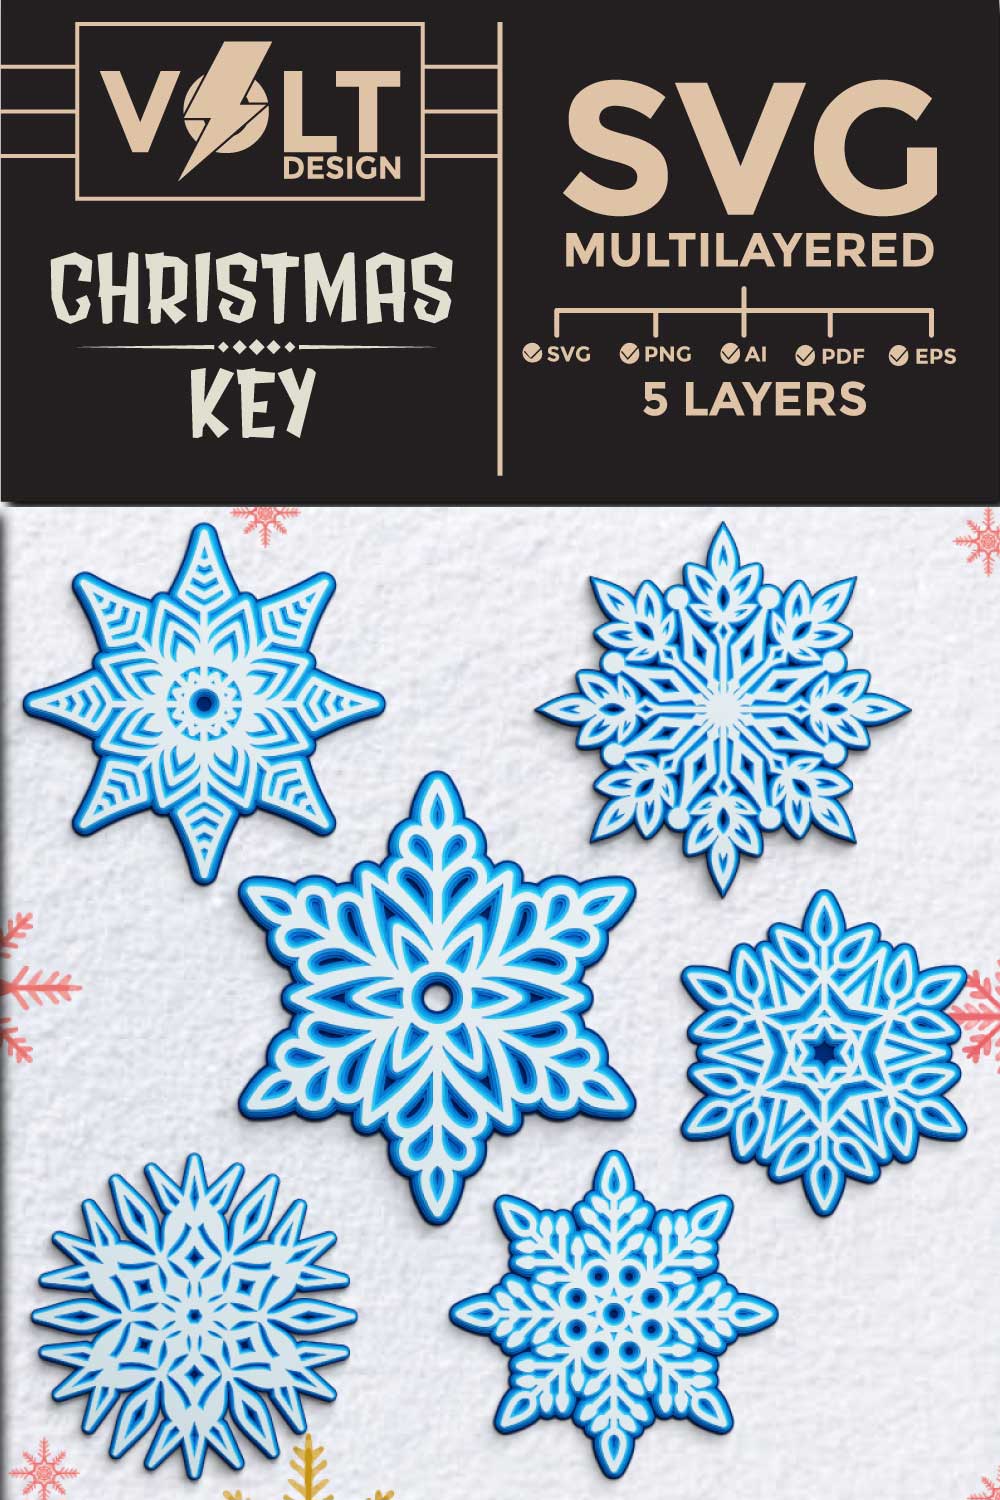 Snowflake 3D svg multilayered cut files pinterest preview image.